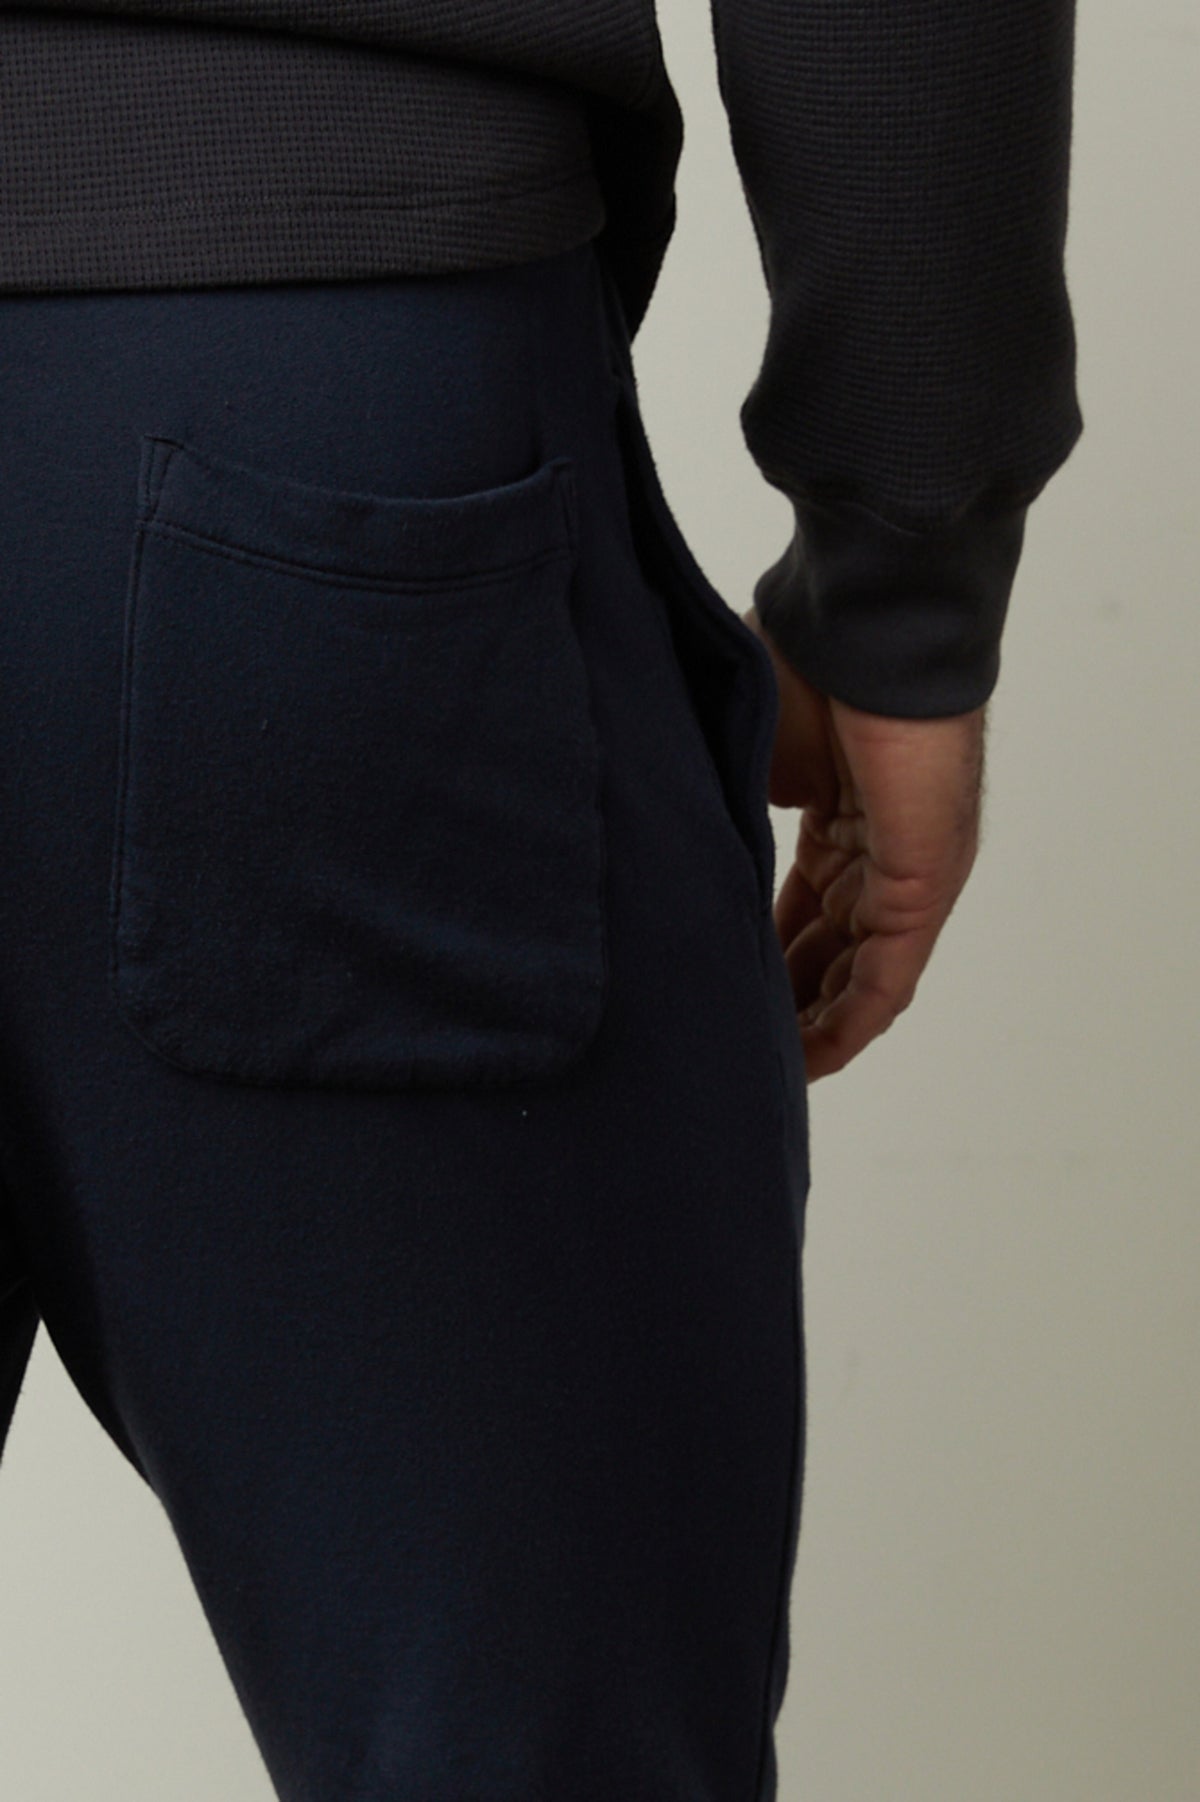 The back view of a man wearing Velvet by Graham & Spencer's CROSBY LUXE FLEECE JOGGER for workouts.-35662741274817